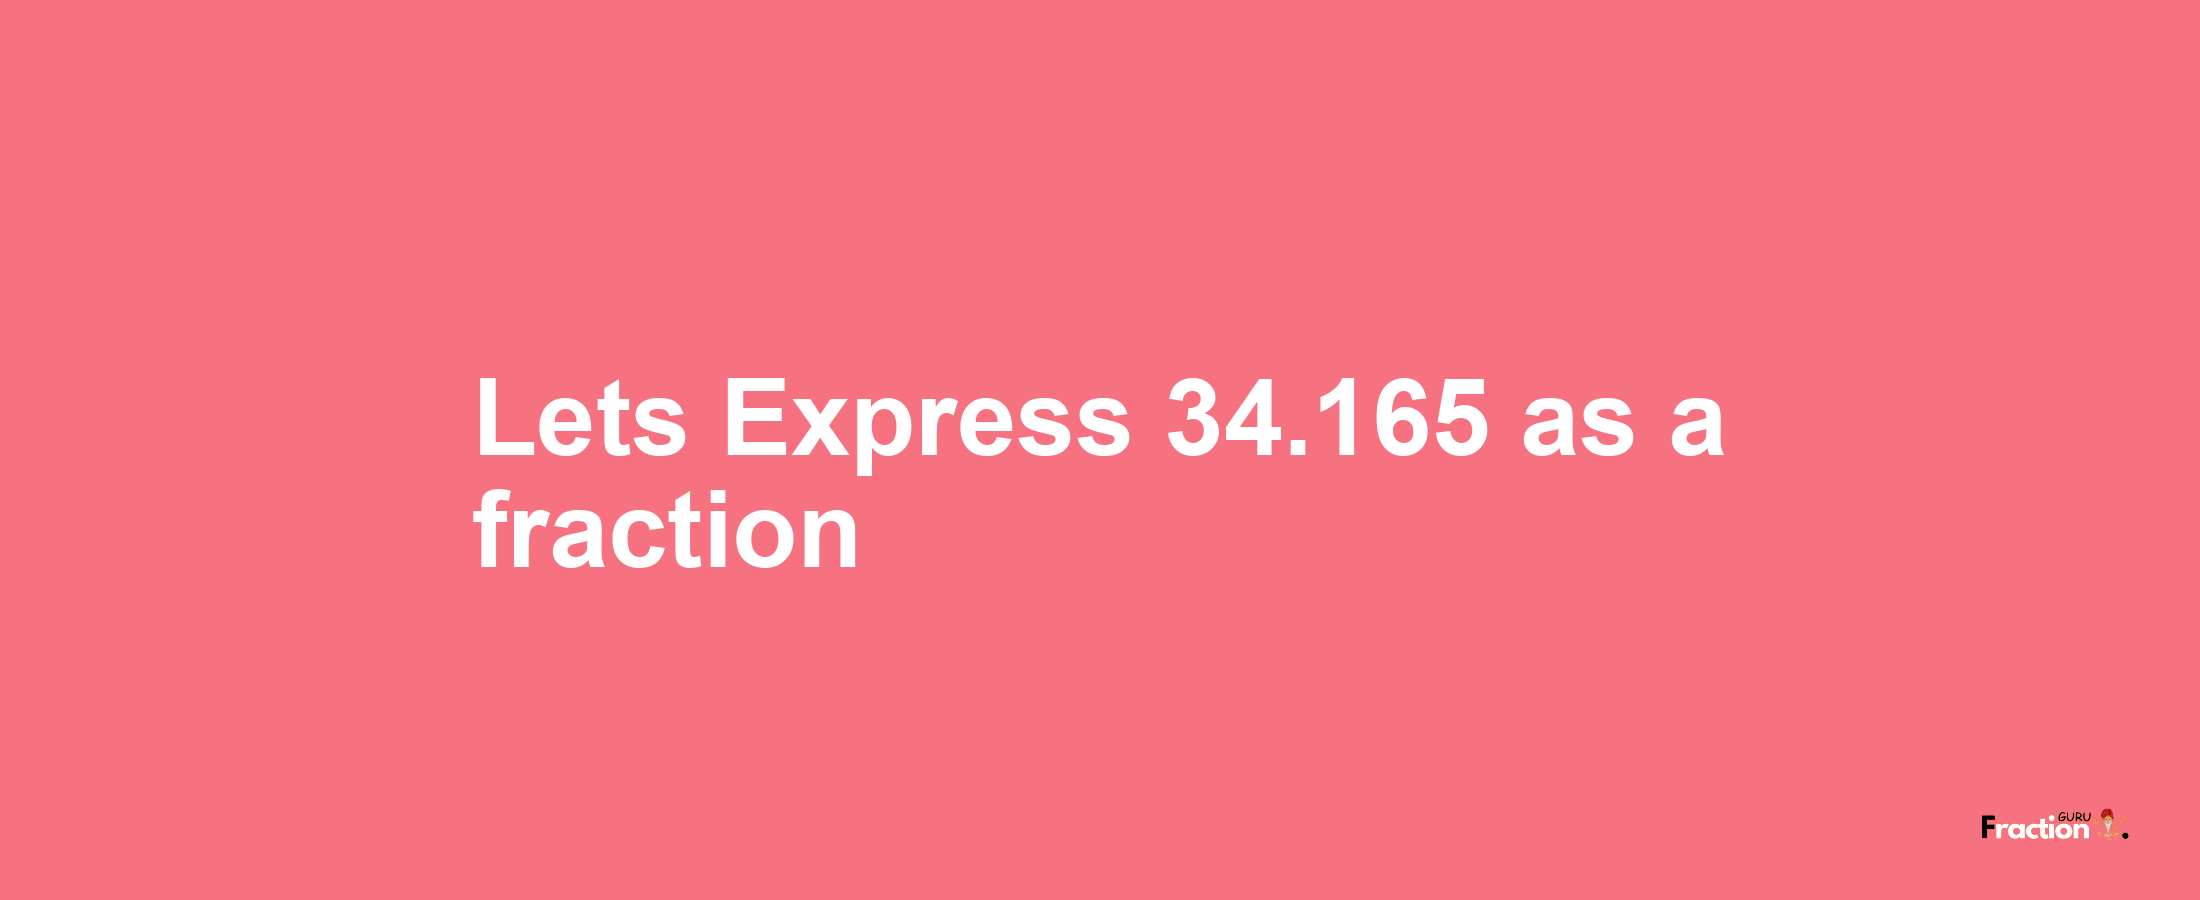 Lets Express 34.165 as afraction